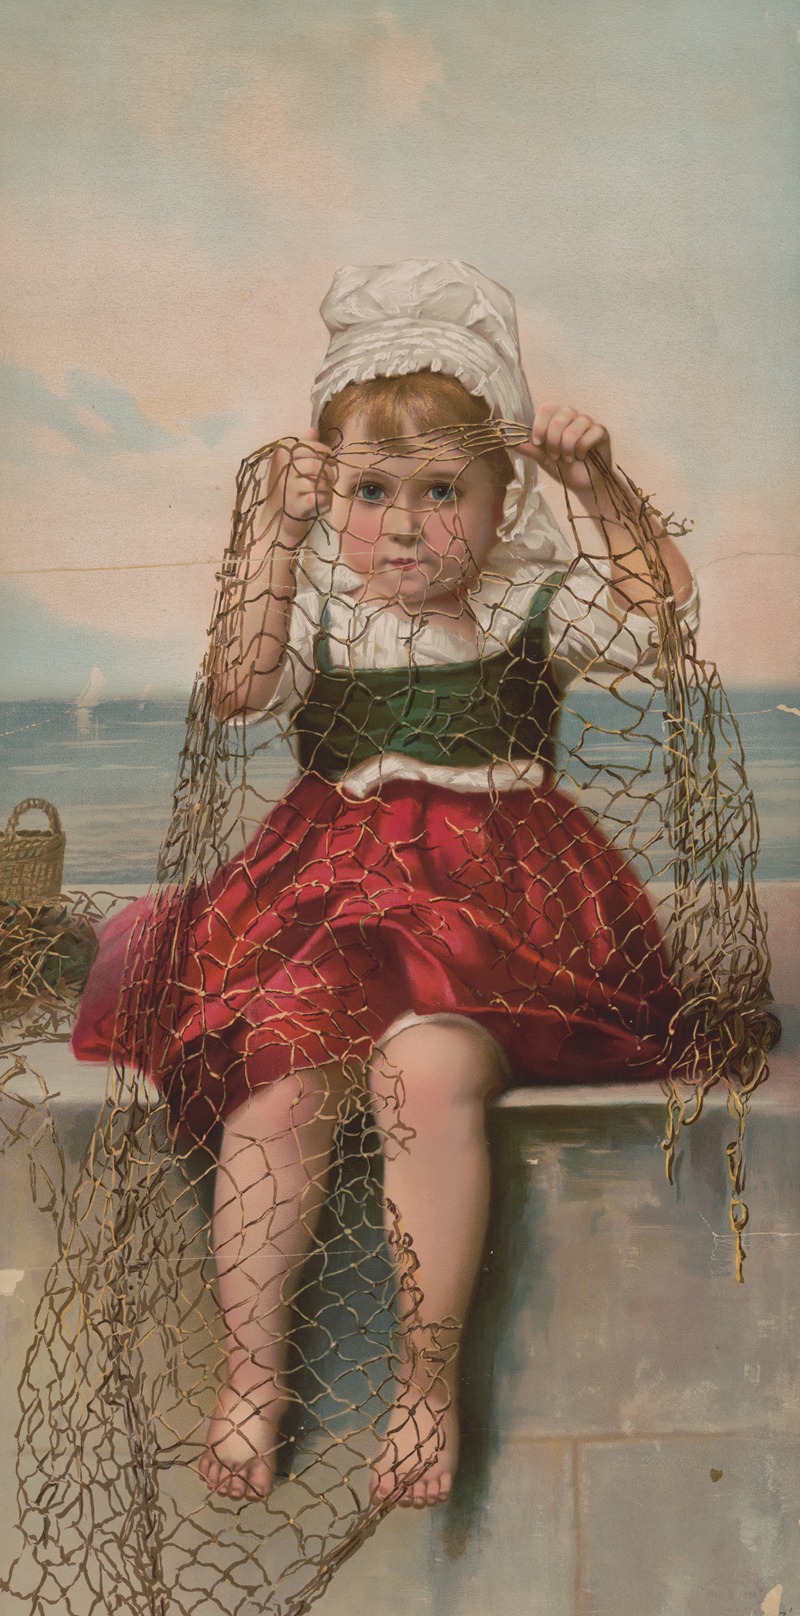 Anonymous - Girl in red and green dress holding fishing net